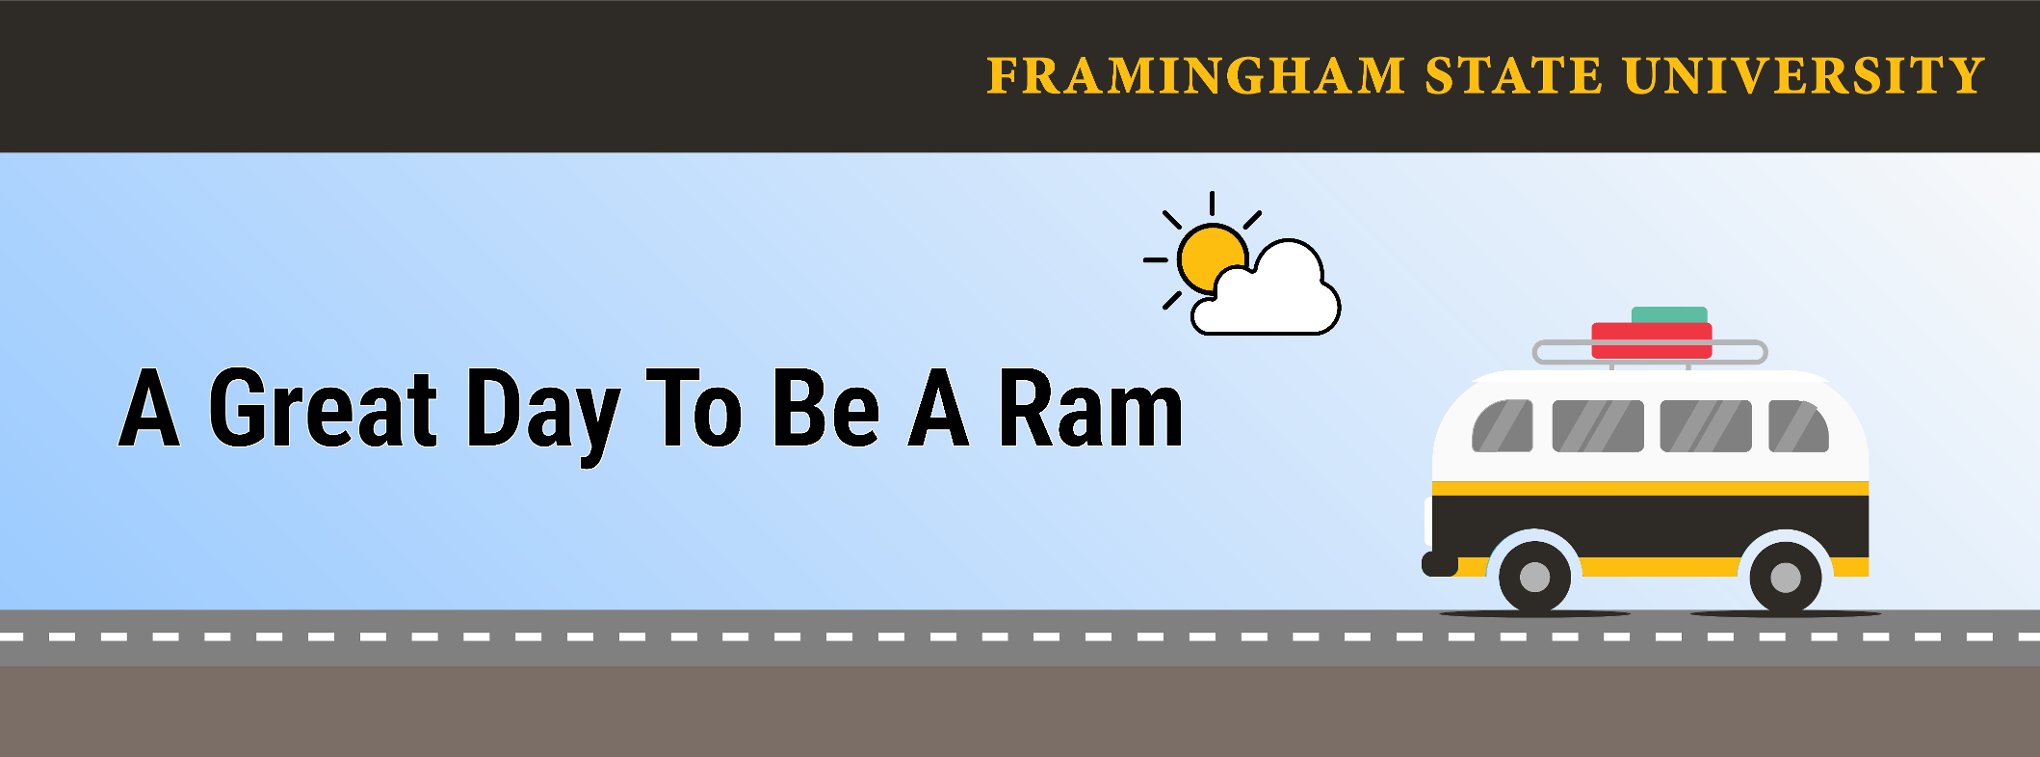 A great day to be a Ram, Framingham State University